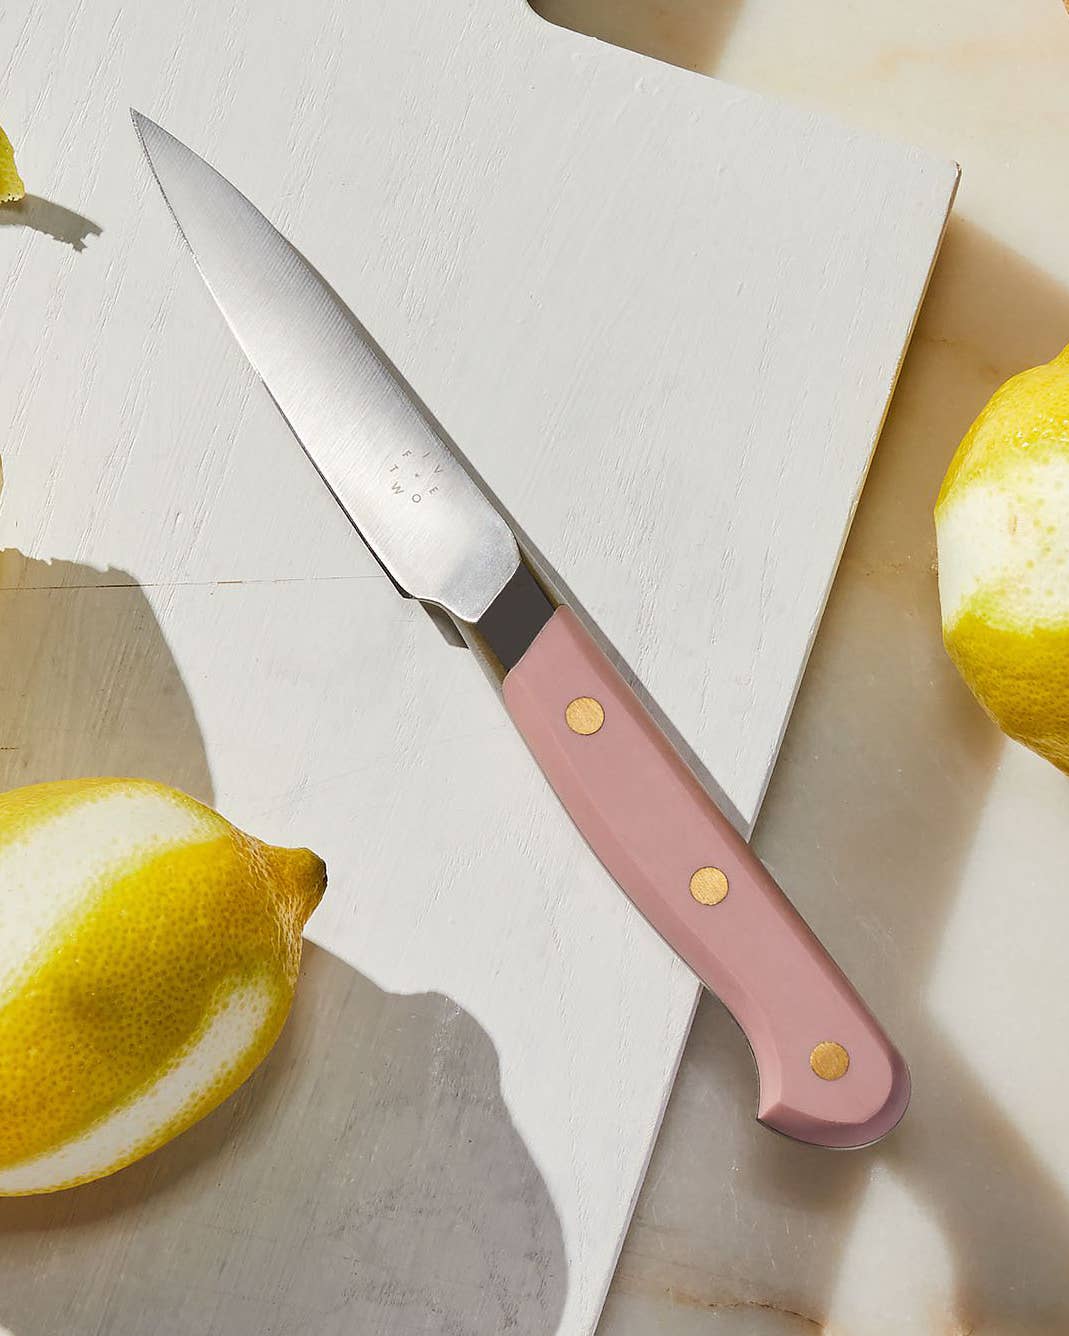 These 7 Best Paring Knives Get Straight to the Point